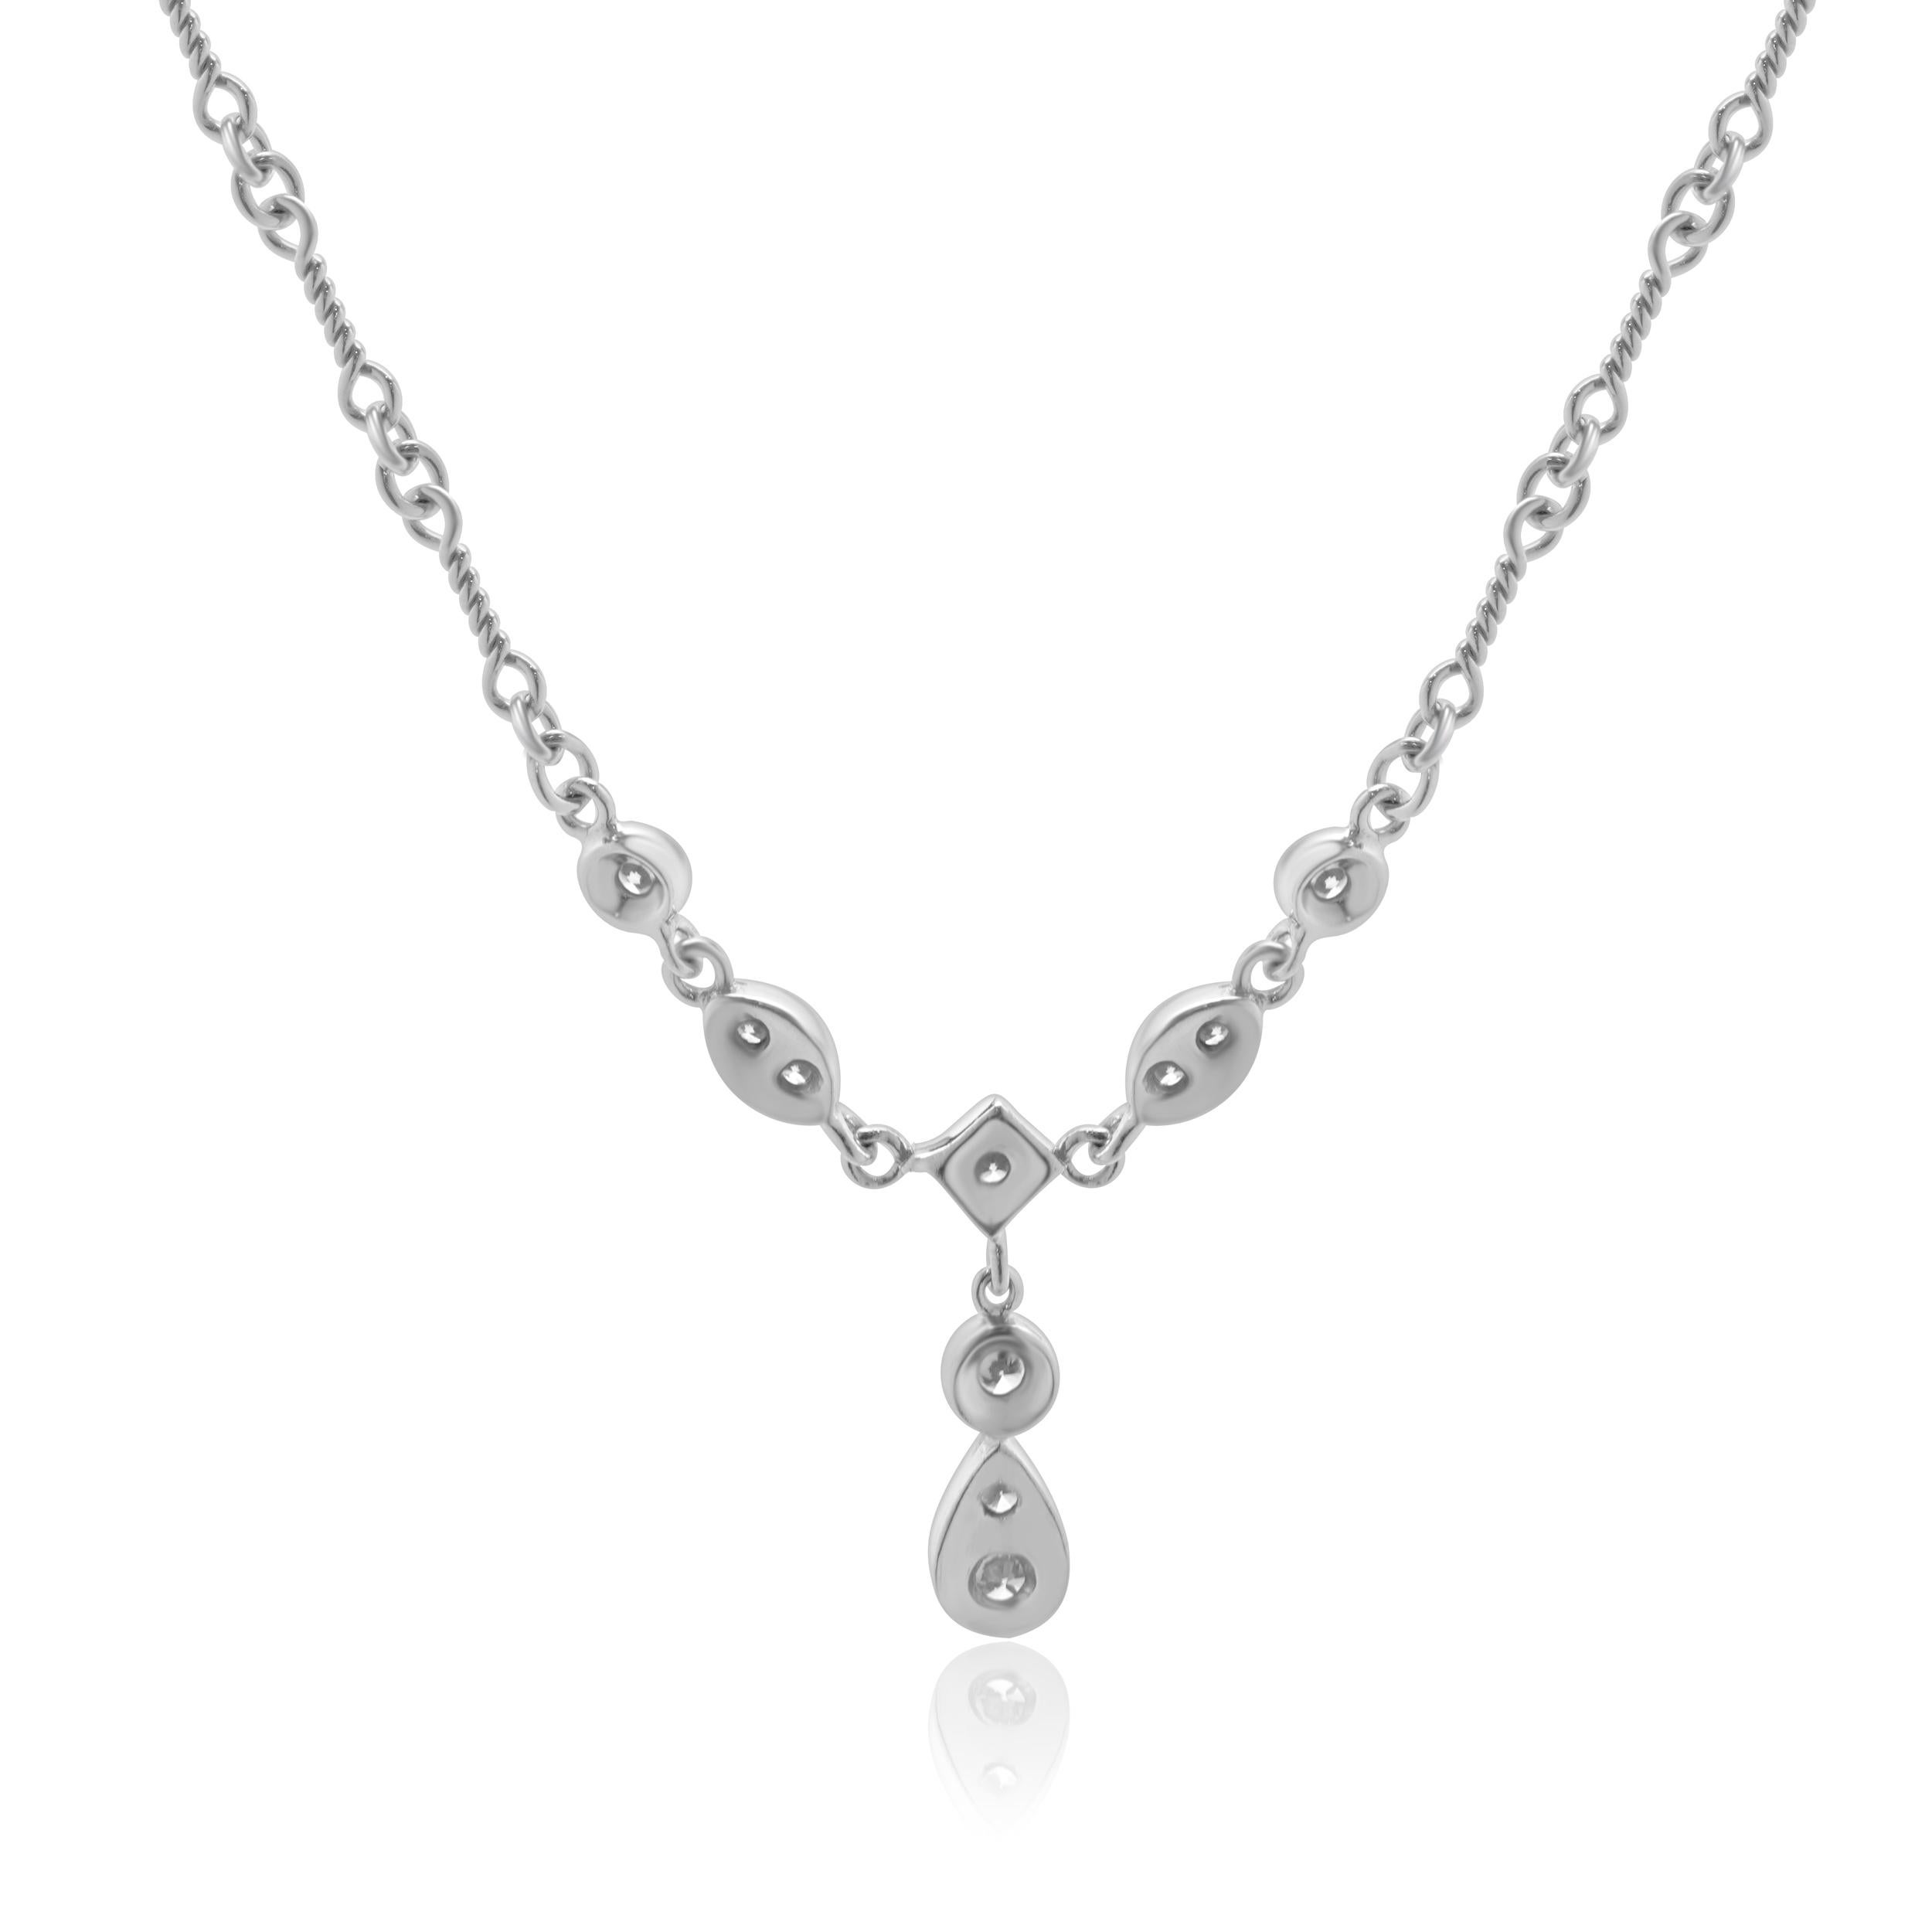 18 Karat White Gold Diamond Twisted Link Lariat Necklace In Excellent Condition For Sale In Scottsdale, AZ